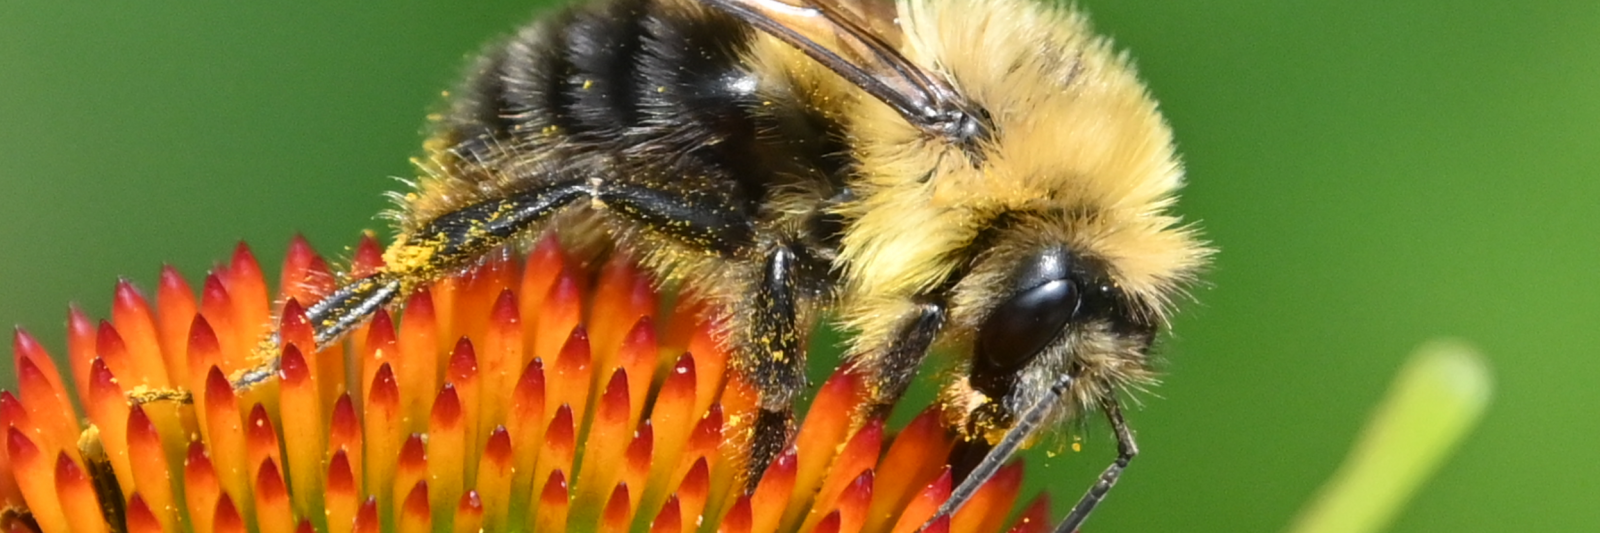 Photograph of a Bee